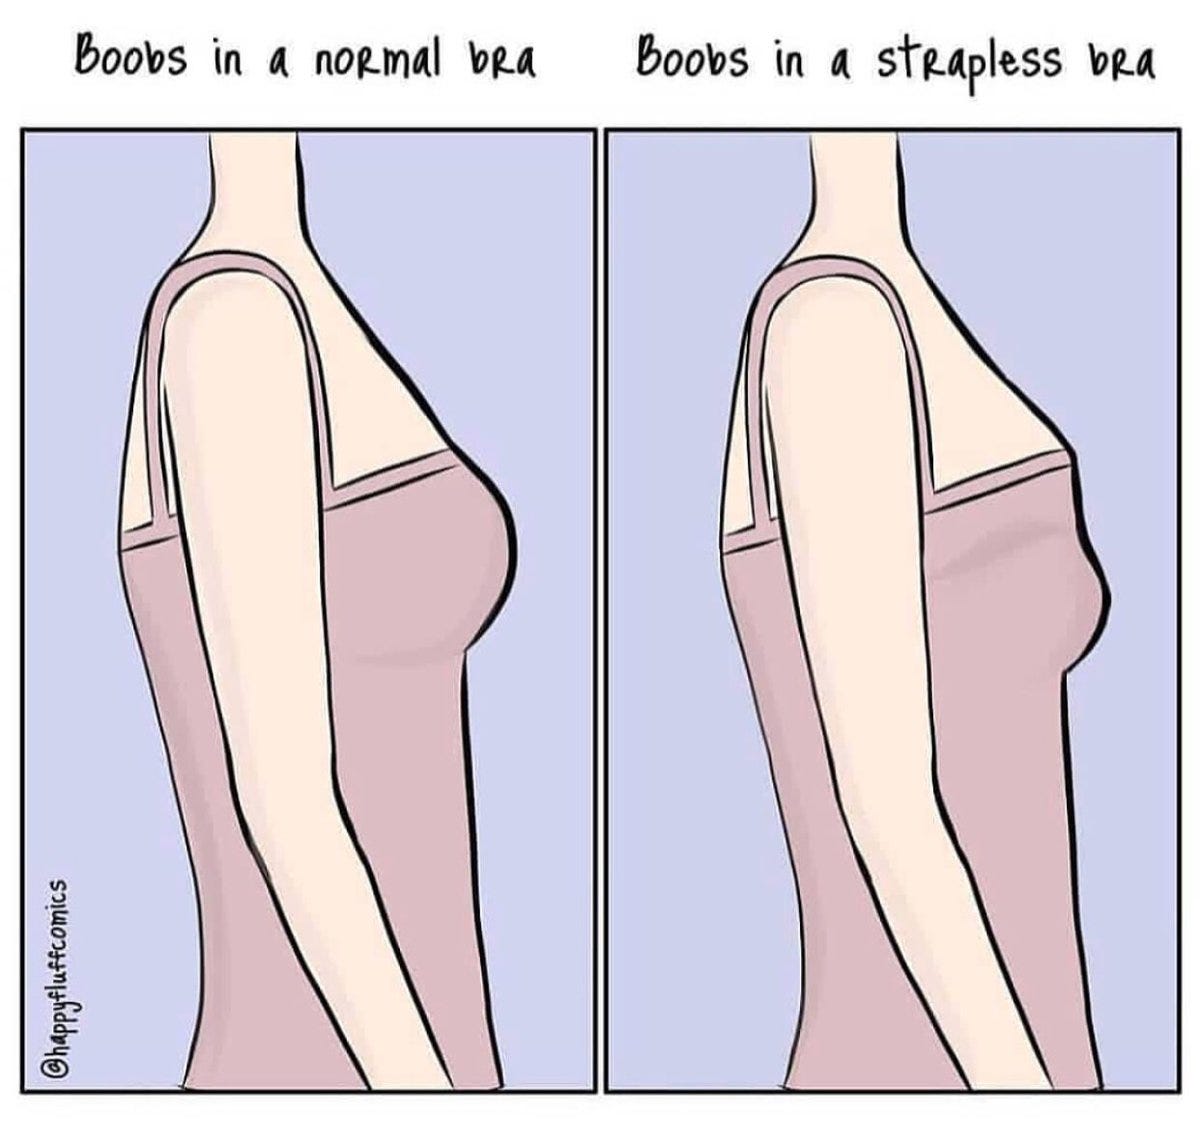 BRA TO OUTFIT COMPATIBILITY. Bras are an important garment for all